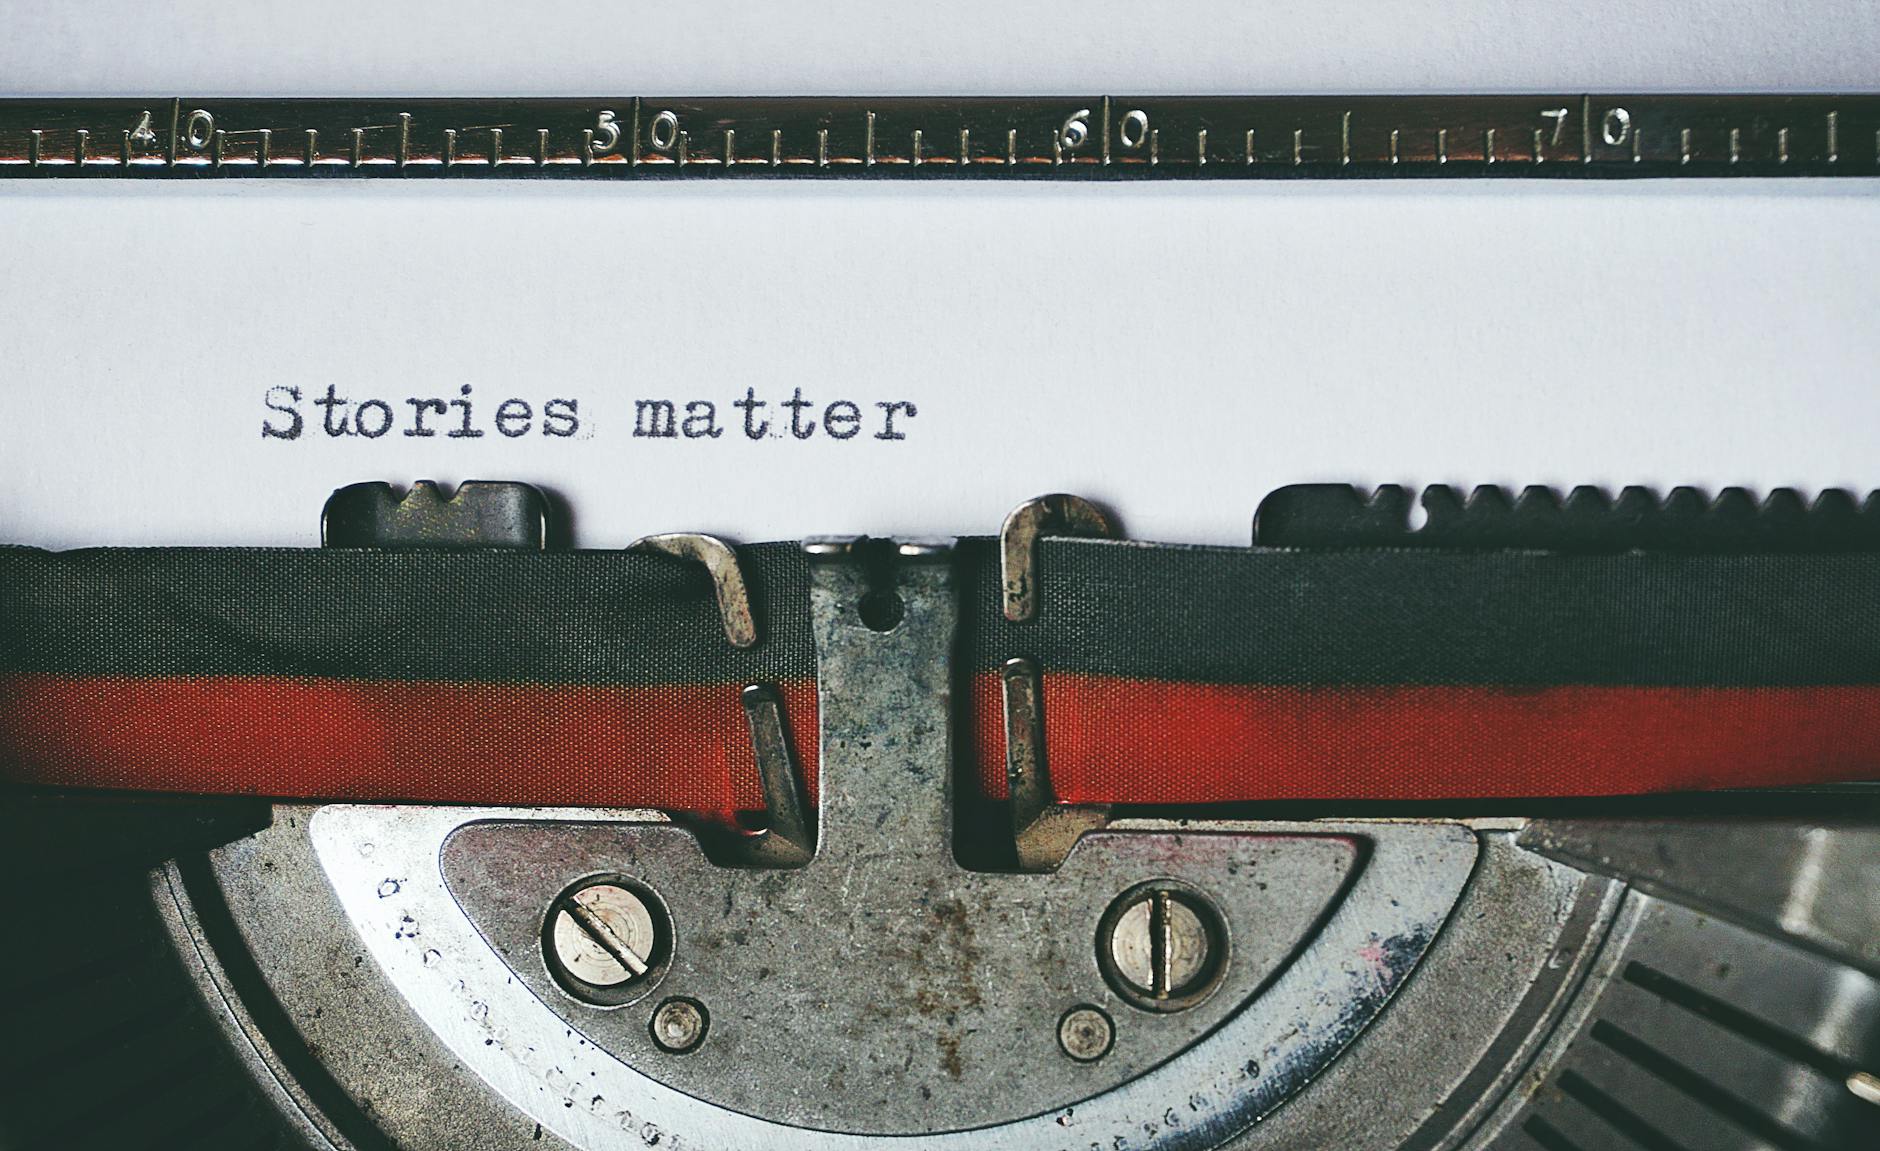 Close up on typewritten text on white paper in a typewriter. Text reads: "Stories matter"